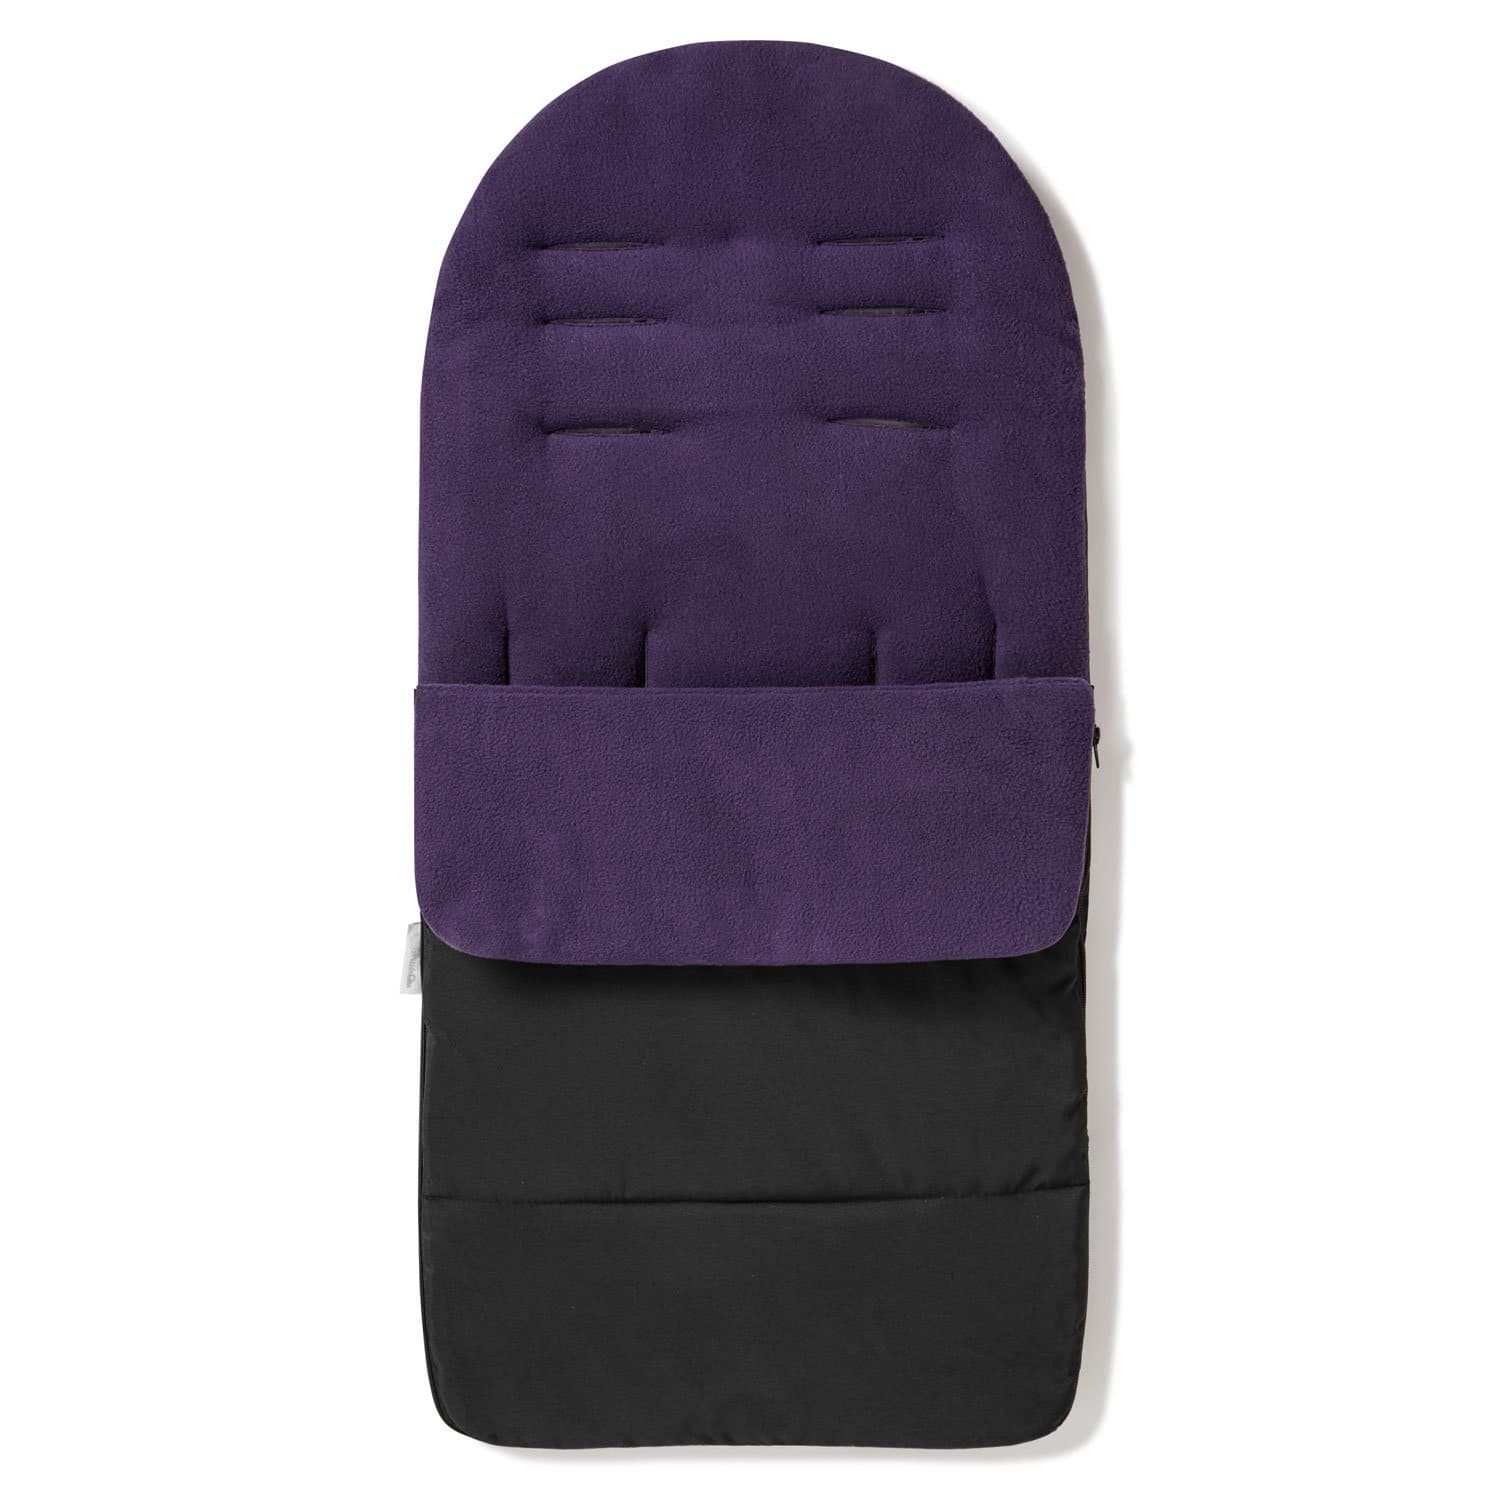 Premium Footmuff / Cosy Toes Compatible with Nuna - Plum Purple / Fits All Models | For Your Little One